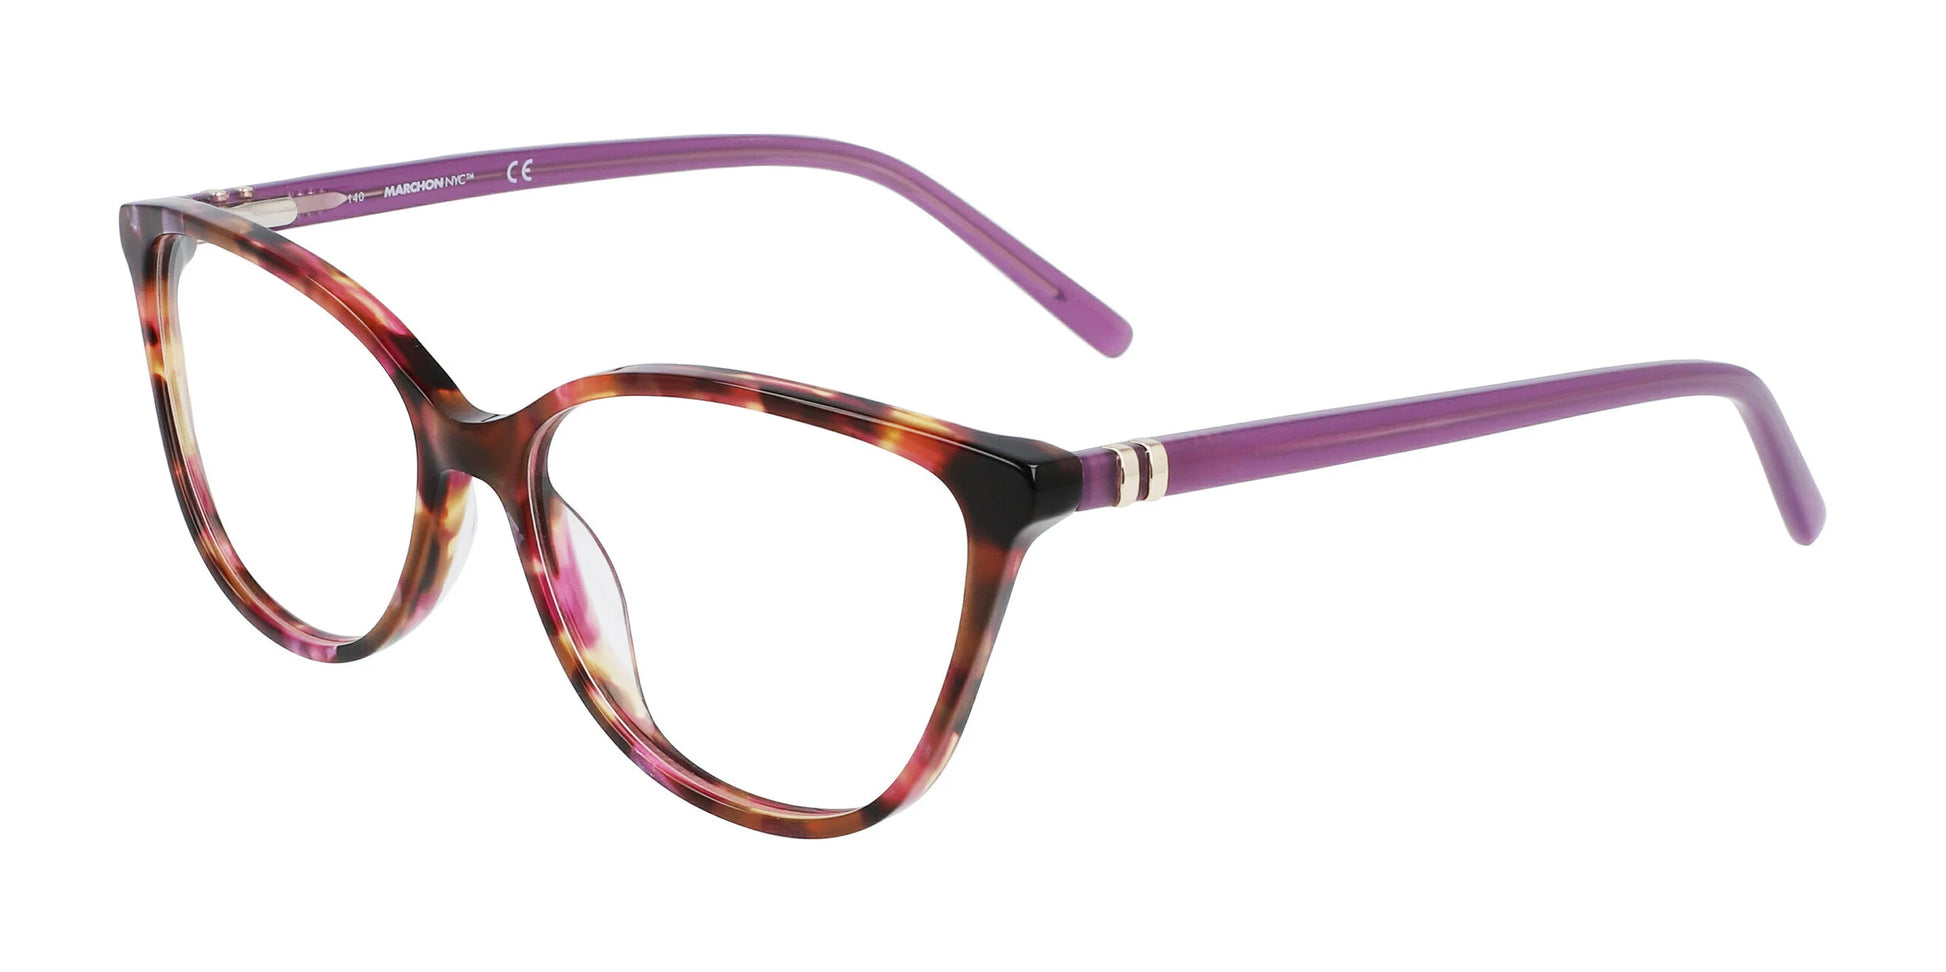 Marchon NYC 5014 Eyeglasses Tortoise With Lavender